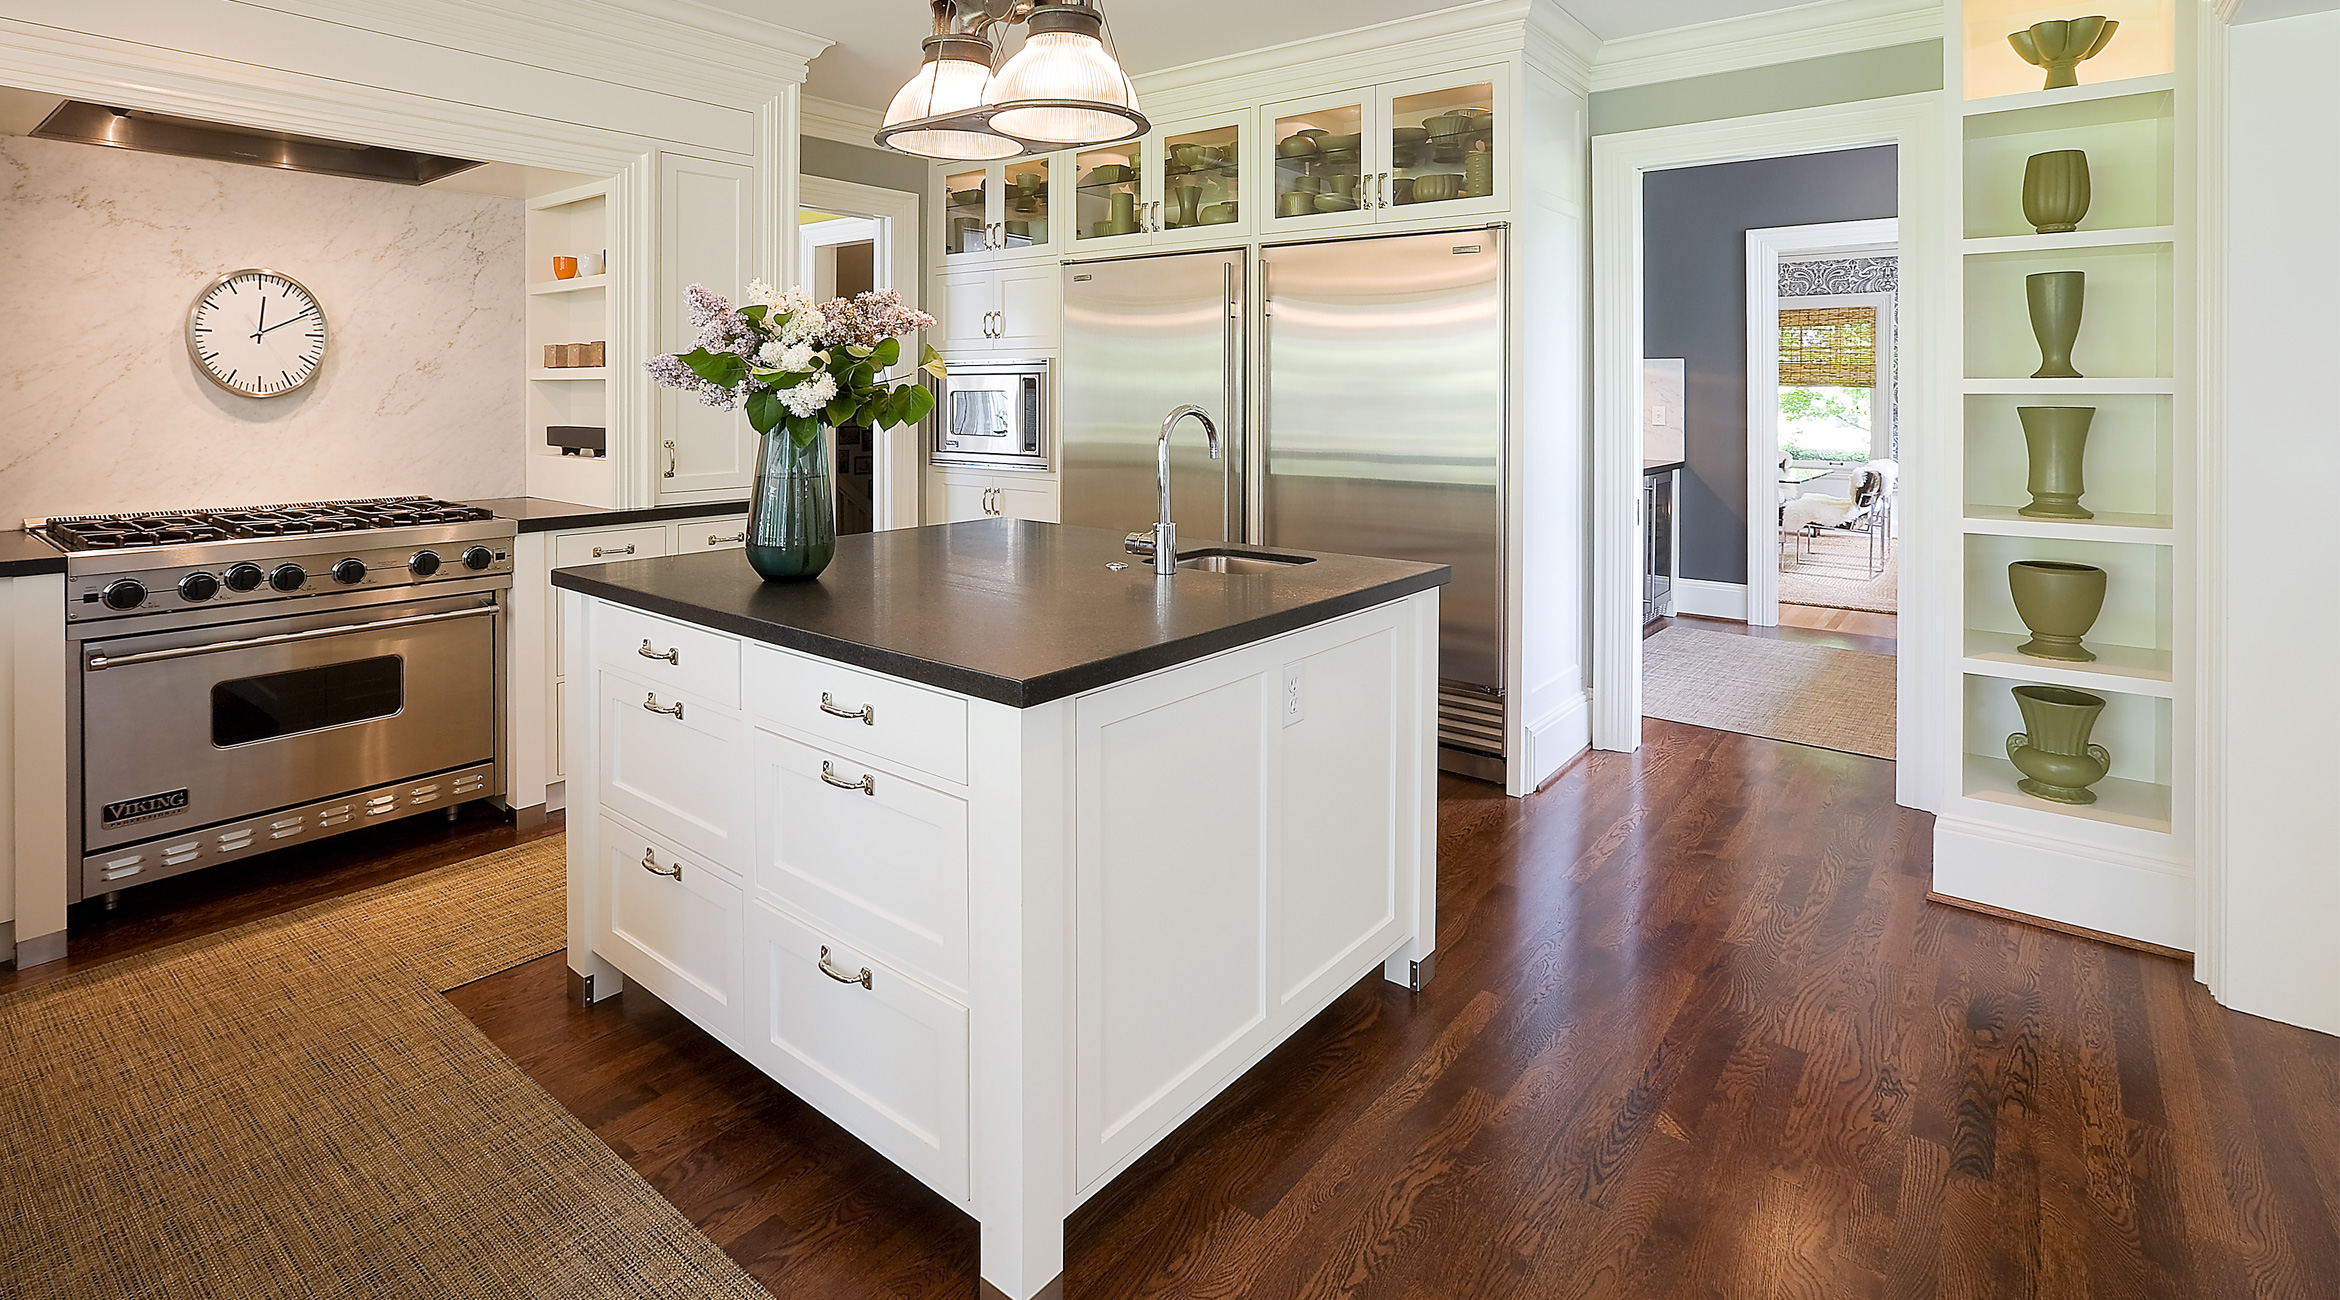 10 Kitchen Island Ideas For Your Next, Kitchen Remodel Ideas With Island